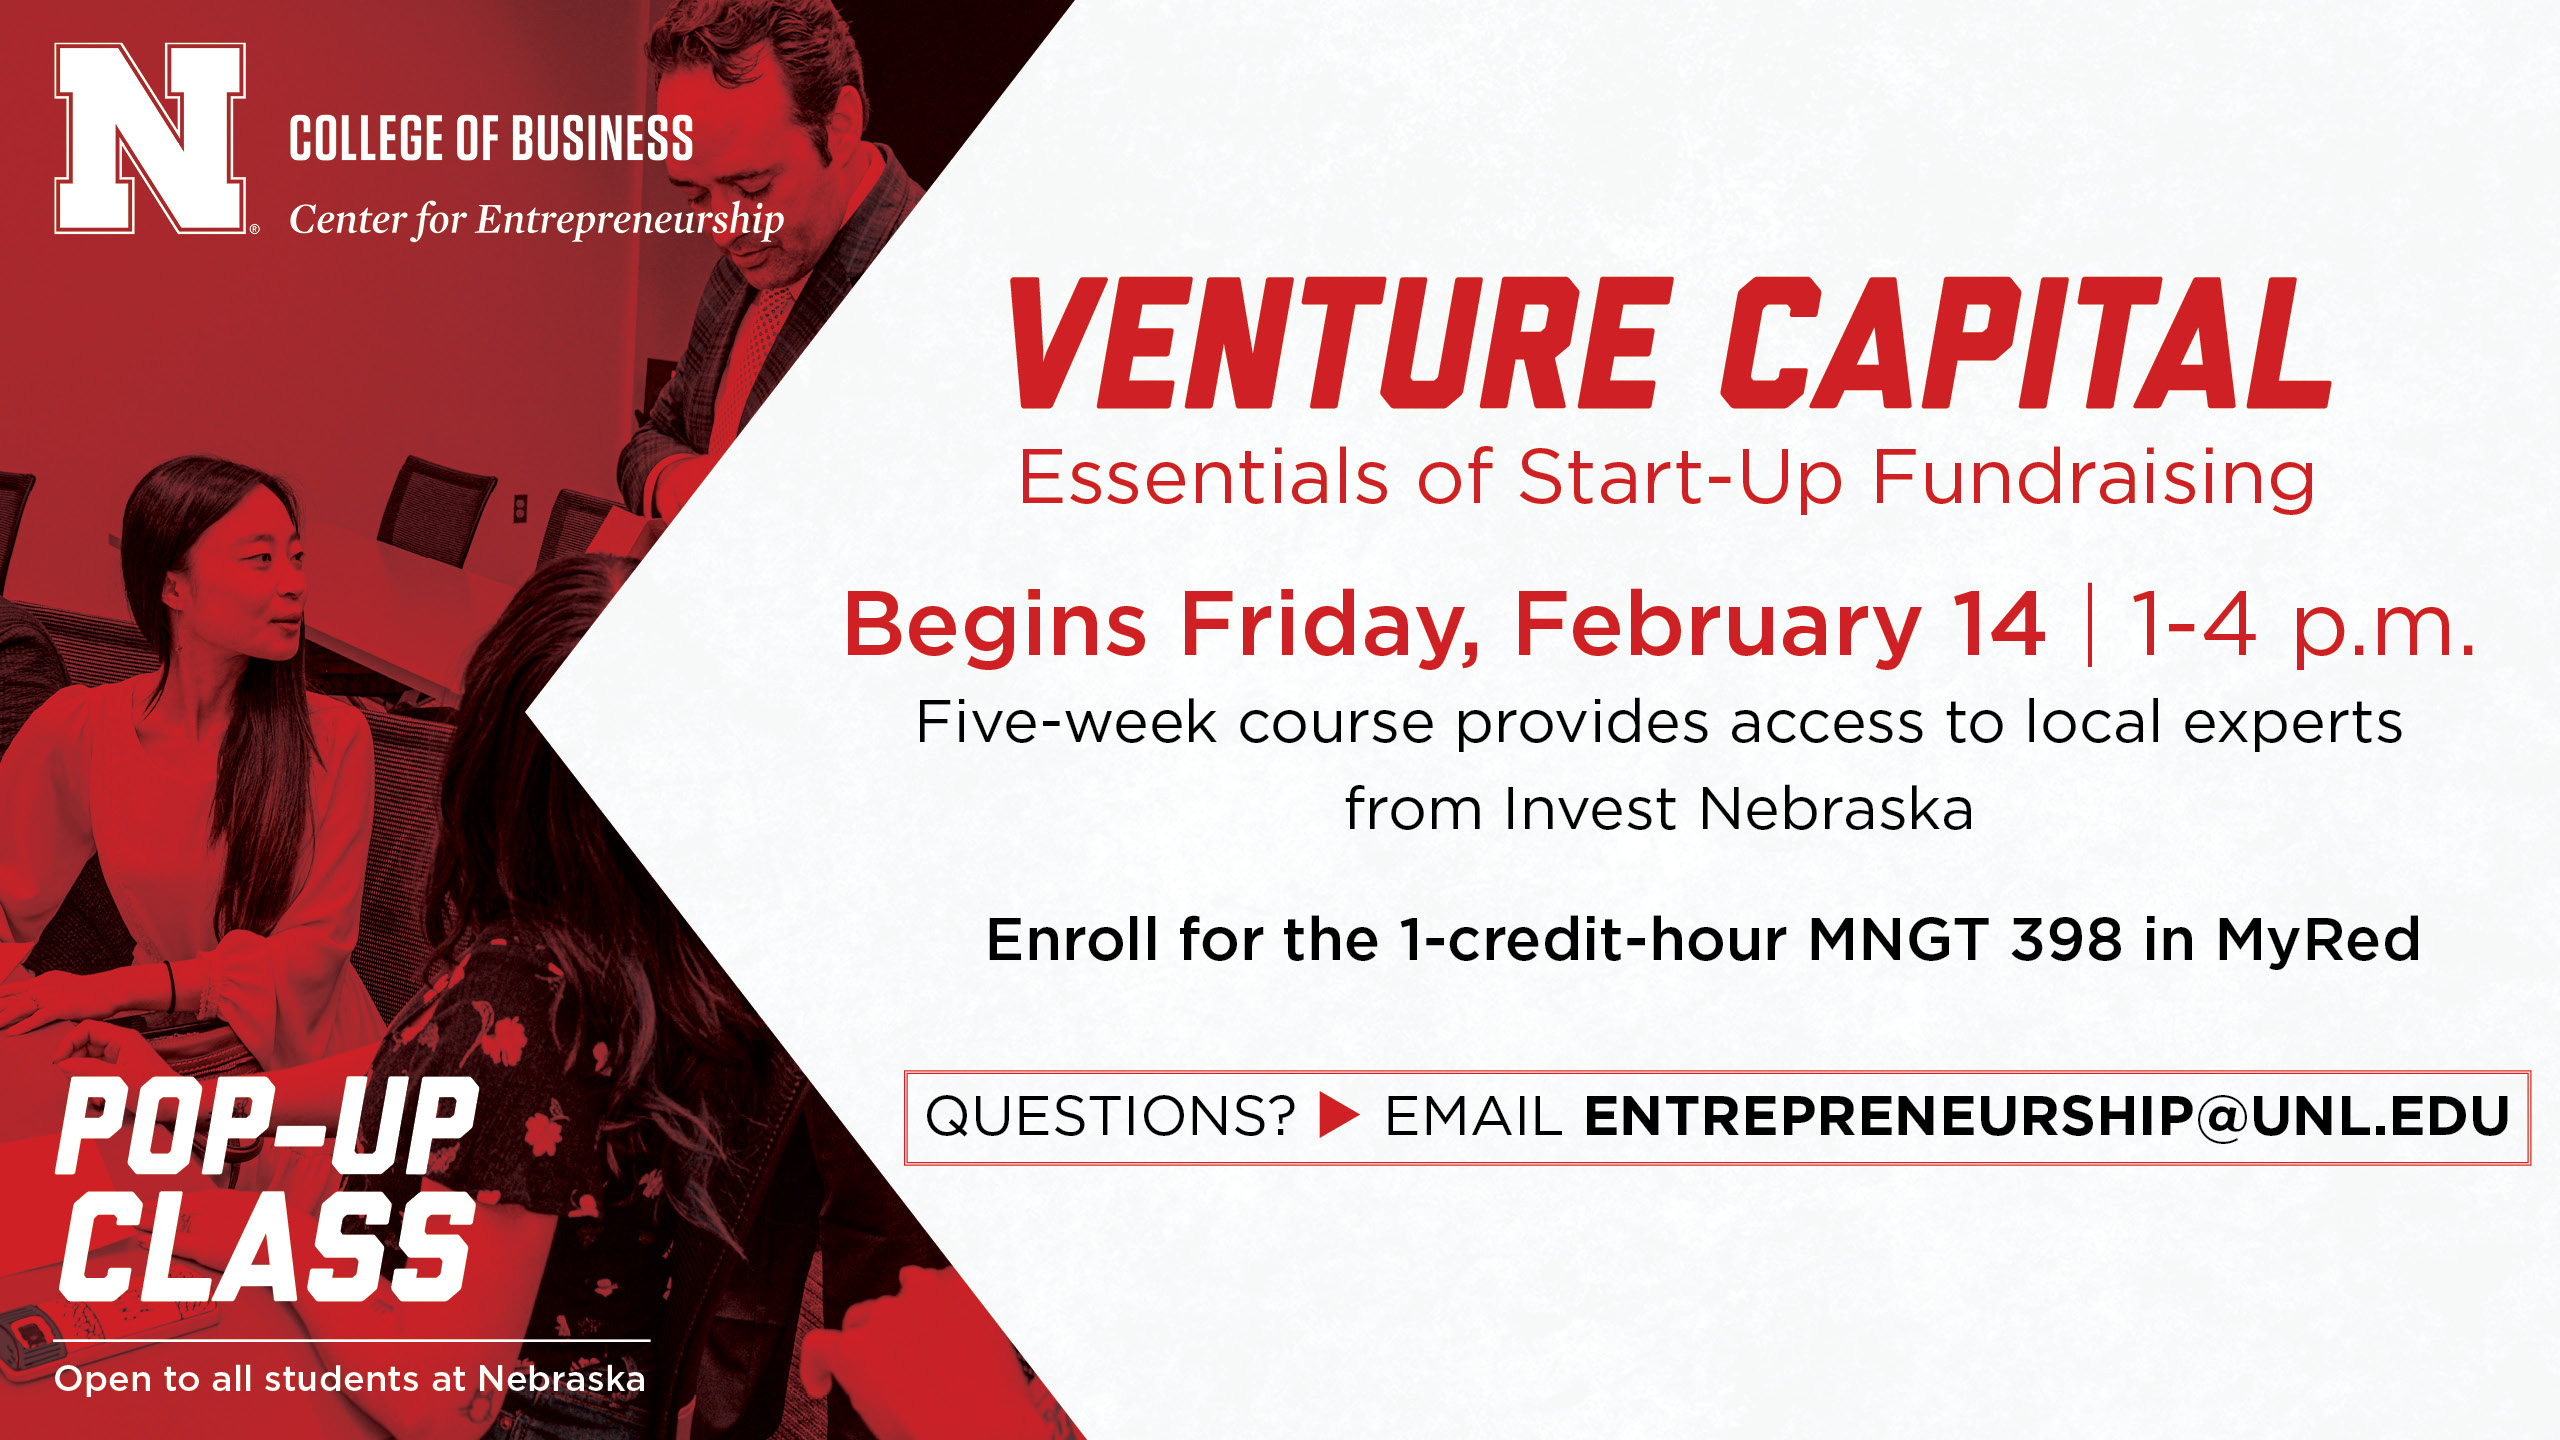 Enroll in the pop-up class to explore start-up fundraising.